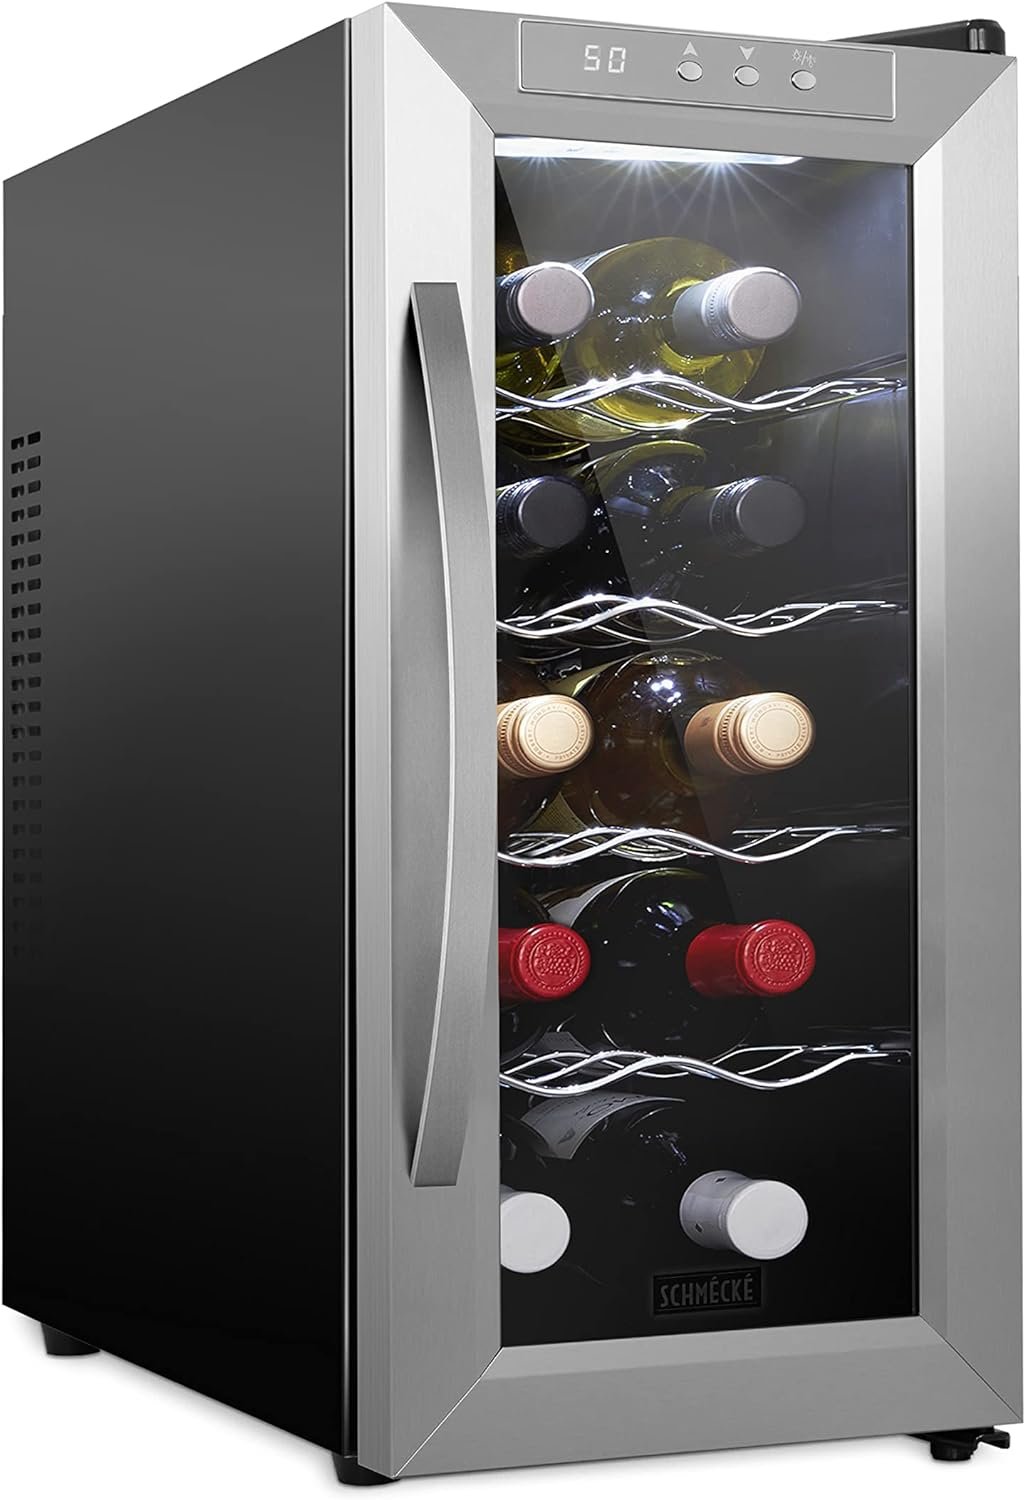 Schmécké 10 Bottle Thermoelectric Wine Cooler/Chiller - Stainless Steel - Counter Top Red  White Wine Cellar w/Digital Temperature, Freestanding Refrigerator Smoked Glass Door Quiet Operation Fridge